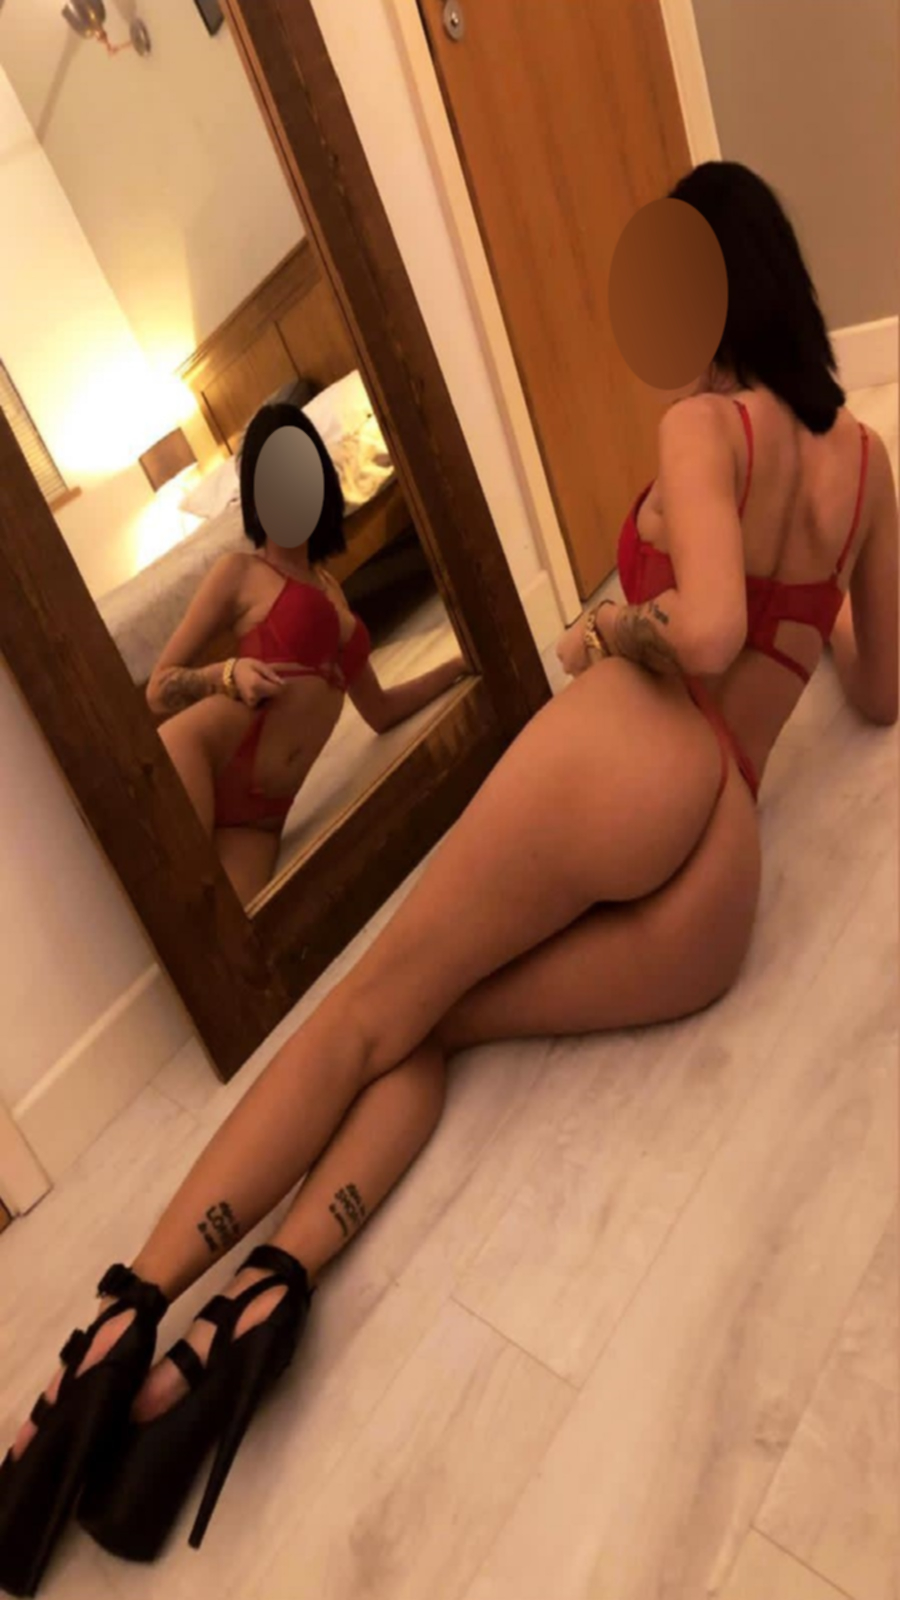 If you are looking for the perfect companion tonight give us a call on 07840527699 to book Christina for the best night of your life.